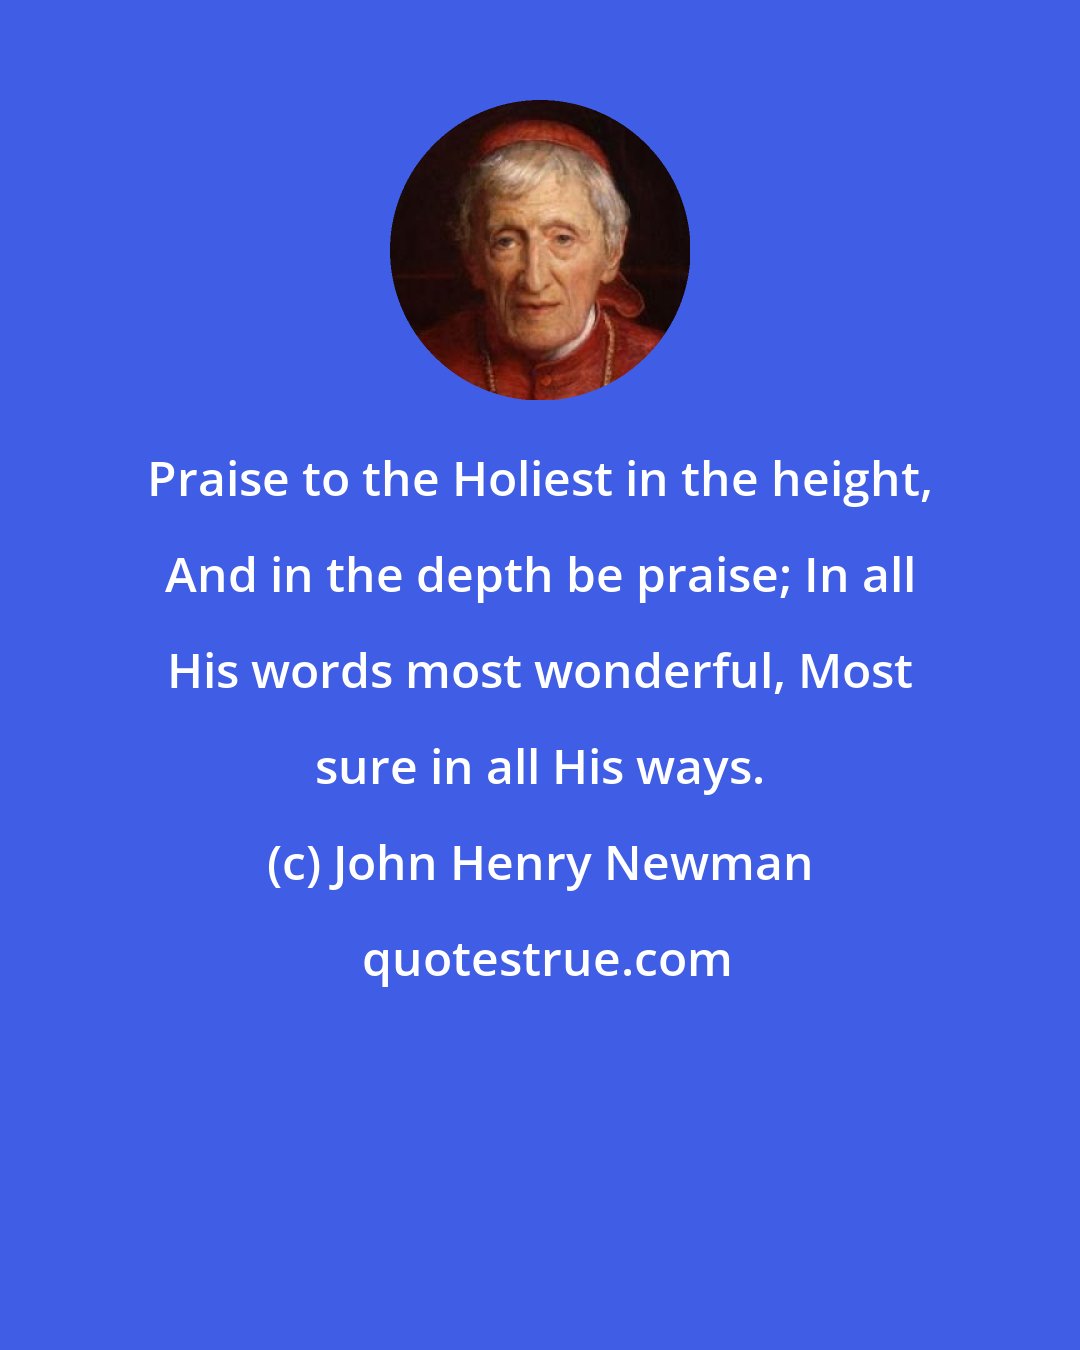 John Henry Newman: Praise to the Holiest in the height, And in the depth be praise; In all His words most wonderful, Most sure in all His ways.